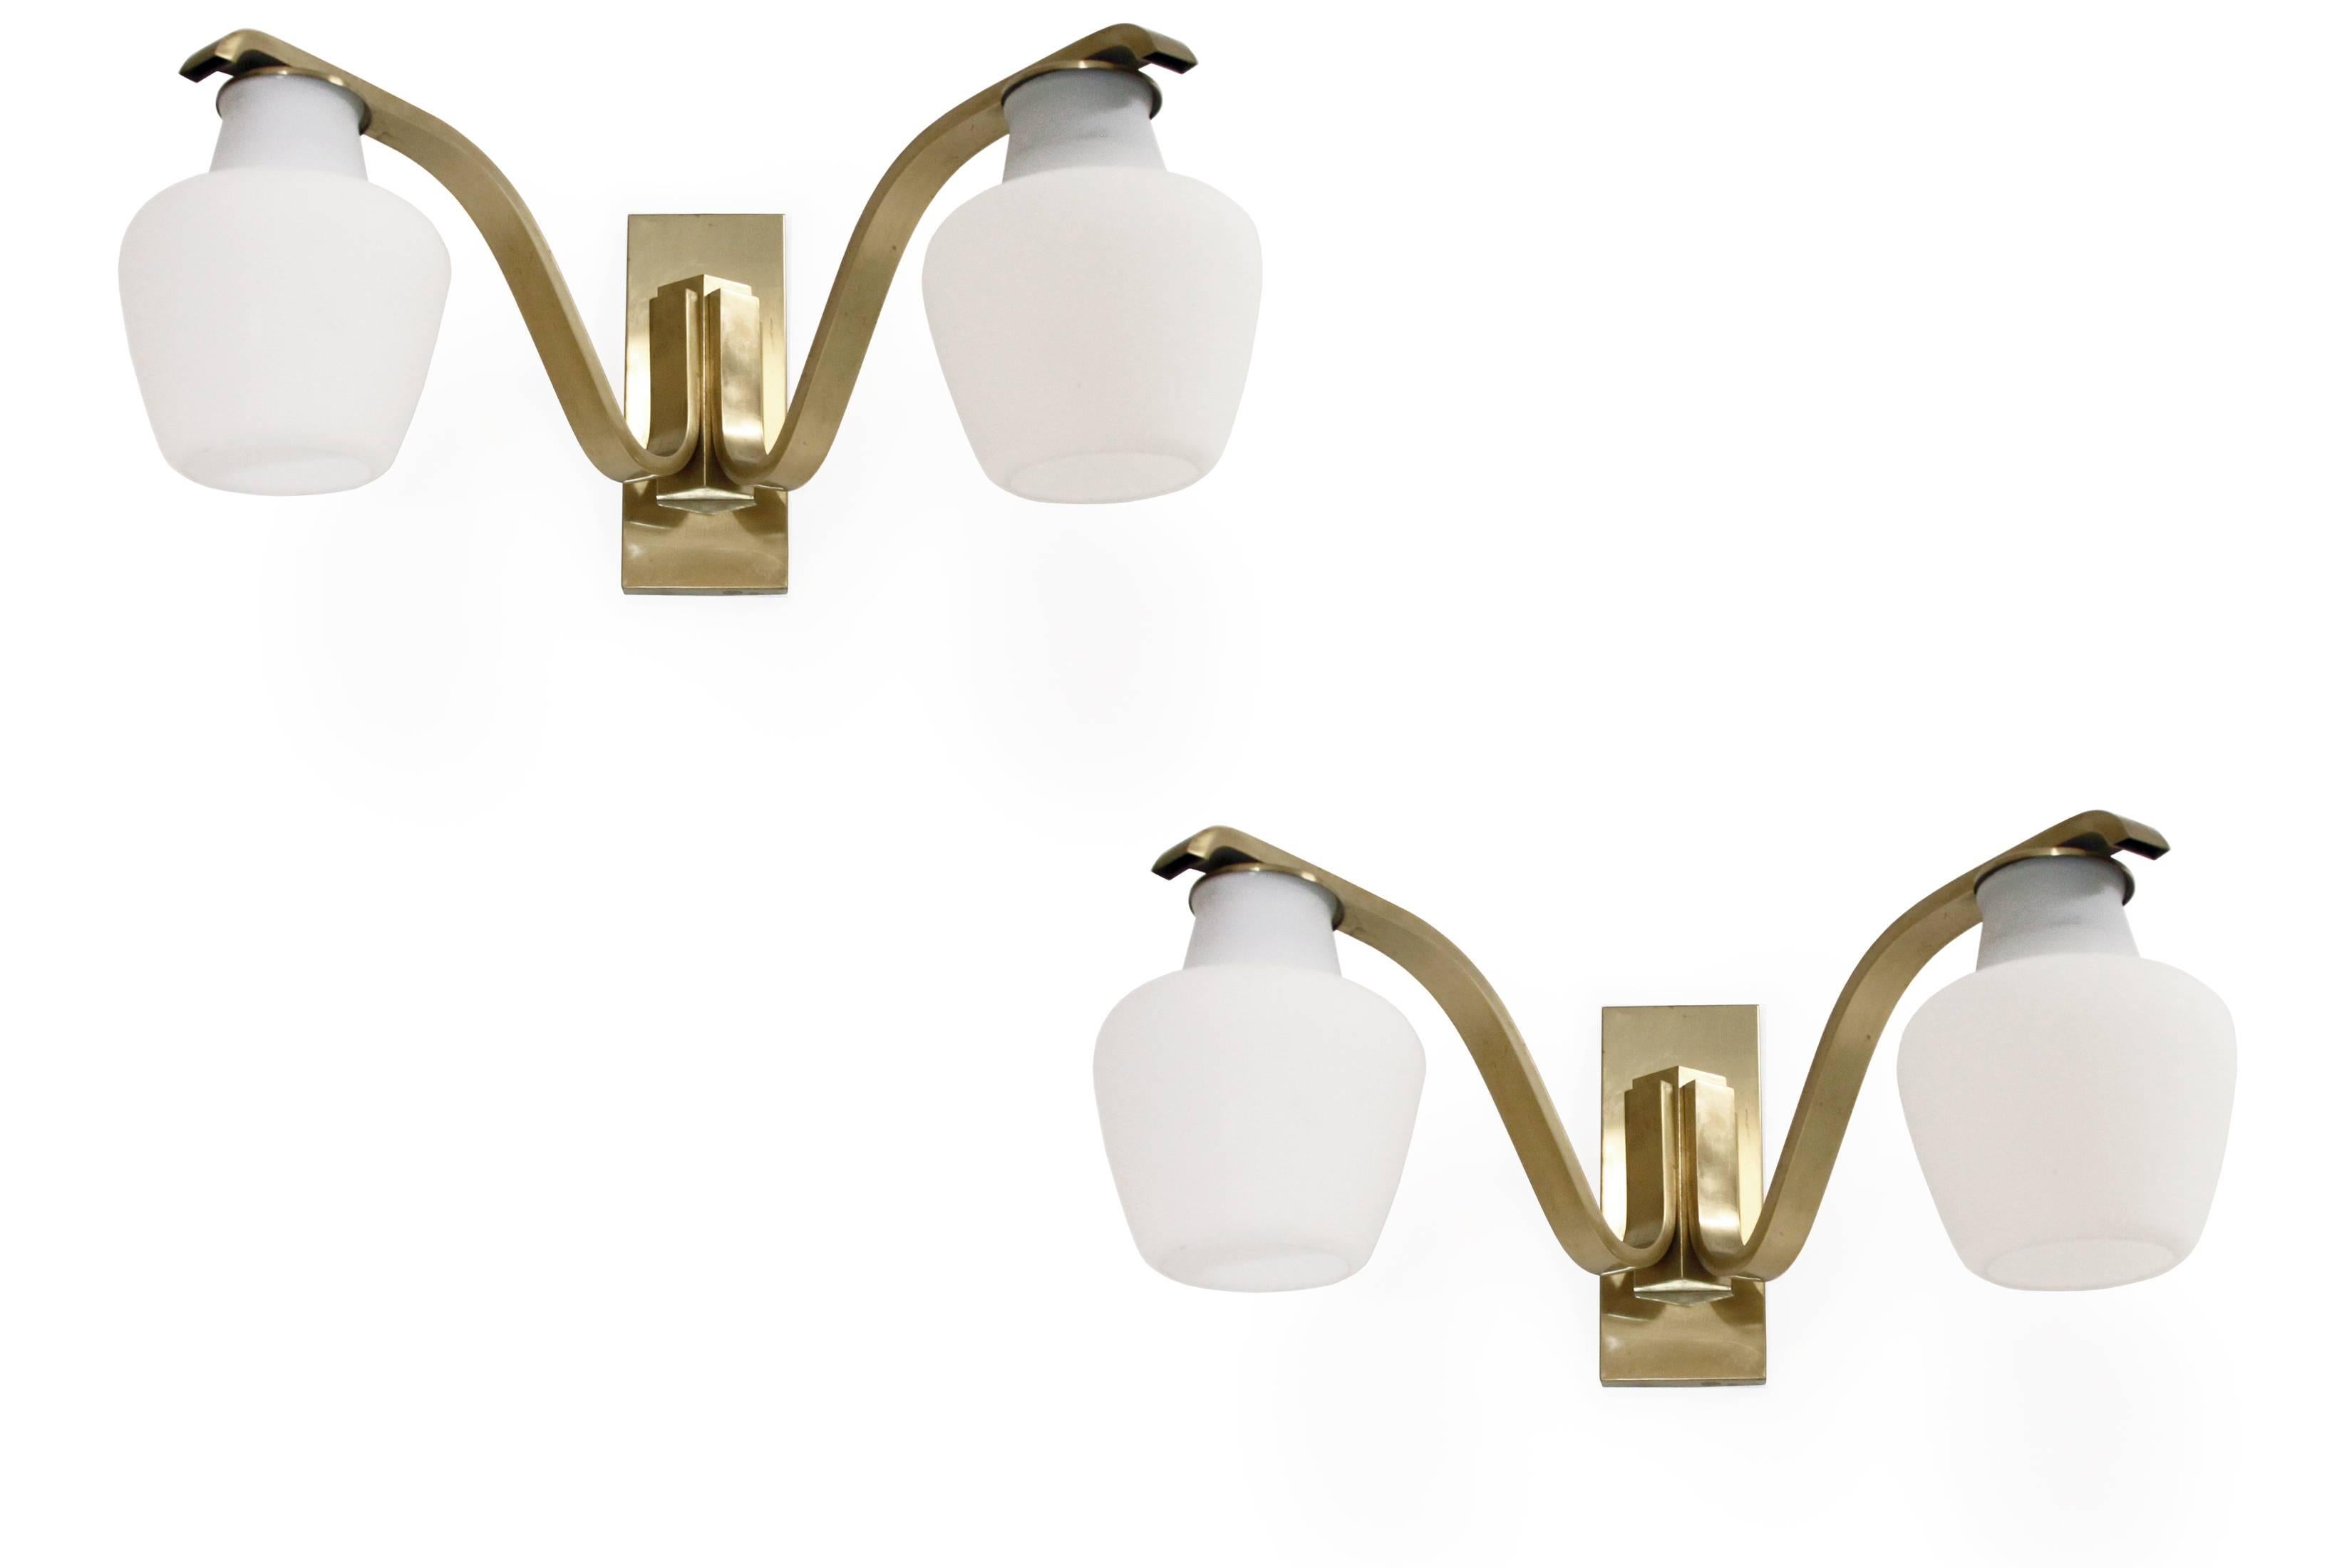 Mid-20th Century Pair of Large Wall Lights in Brass by Fog & Mørup, Denmark, 1950s